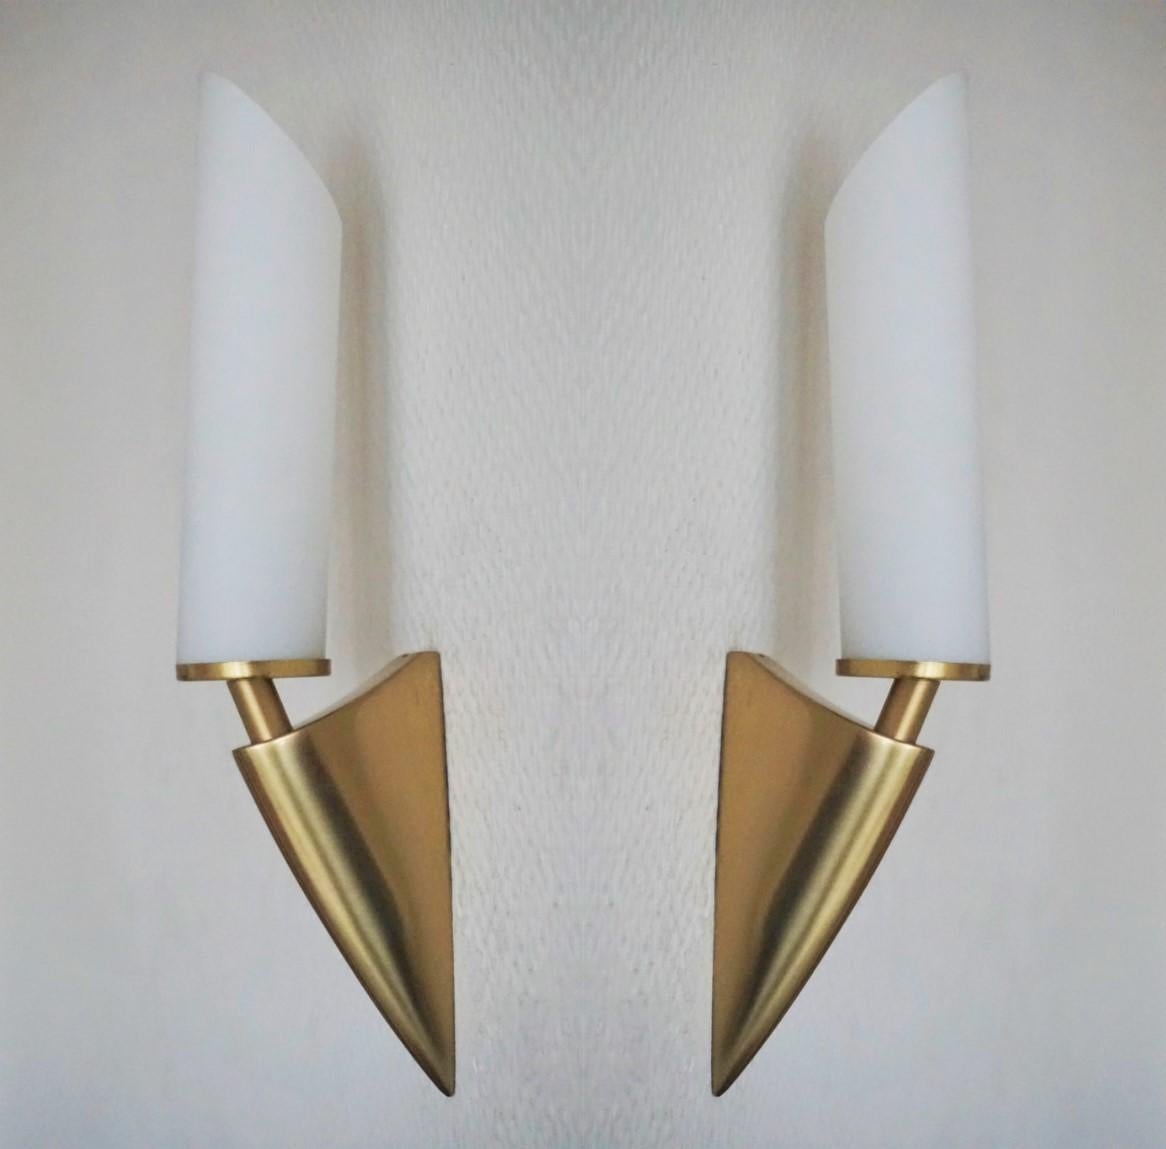 A pair of midcentury Italian design wall lights with brushed brass base and satin glass shades, Italy, 1950-1959. 
Each sconce takes one E14 40watt light bulb.
Measures: Height 10